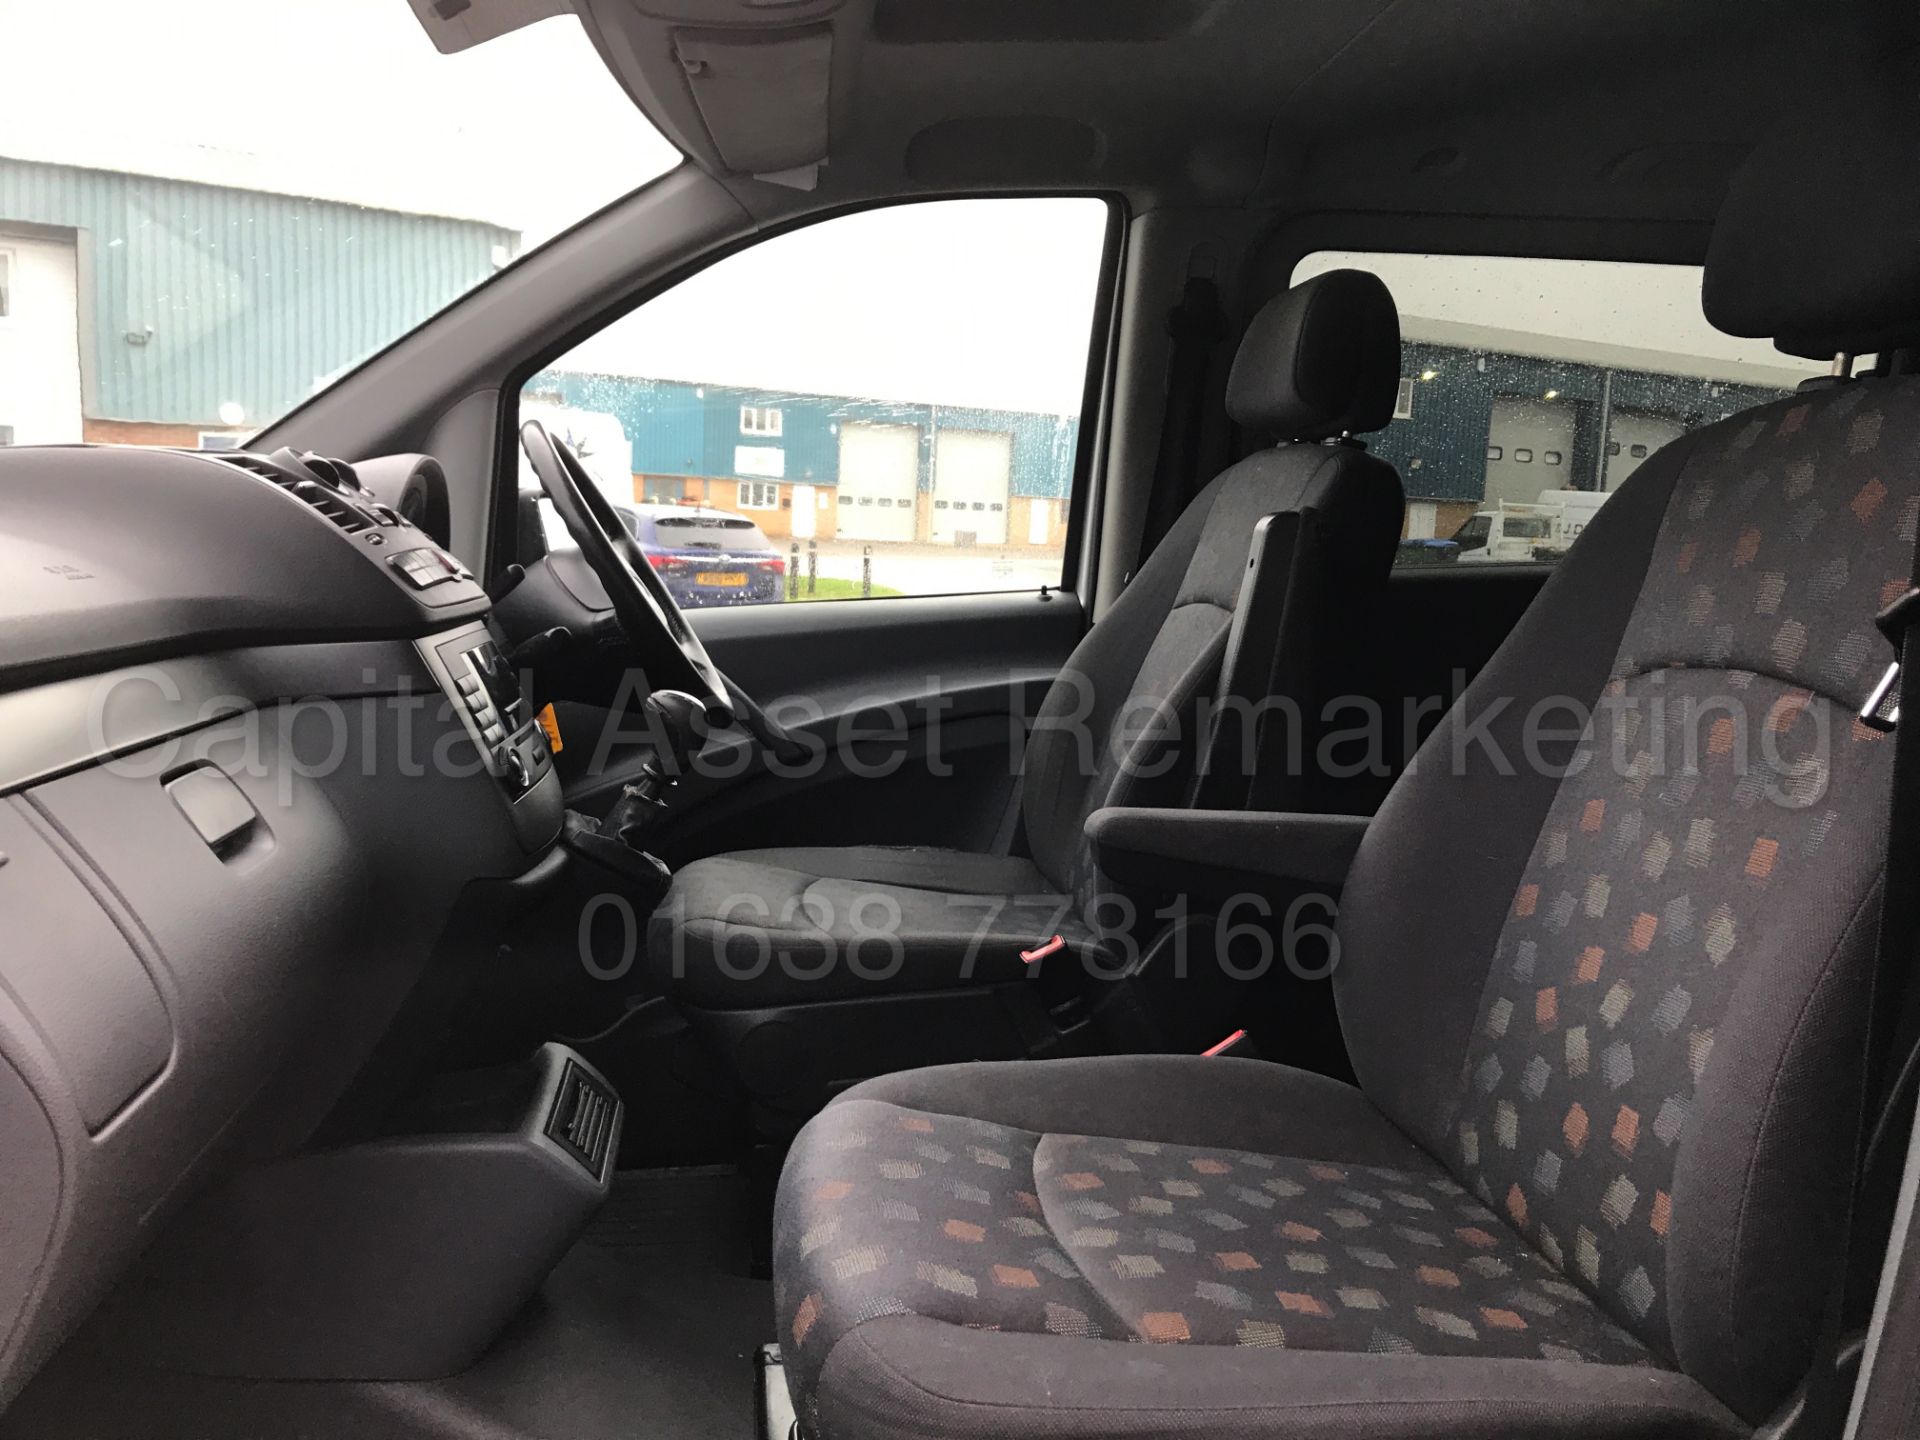 MERCEDES VITO *SPORT* '5 SEATER DUELINER' (2010 - 10 REG) '2.1 CDI - 150 BHP - 6 SPEED' **AIR CON** - Image 18 of 35